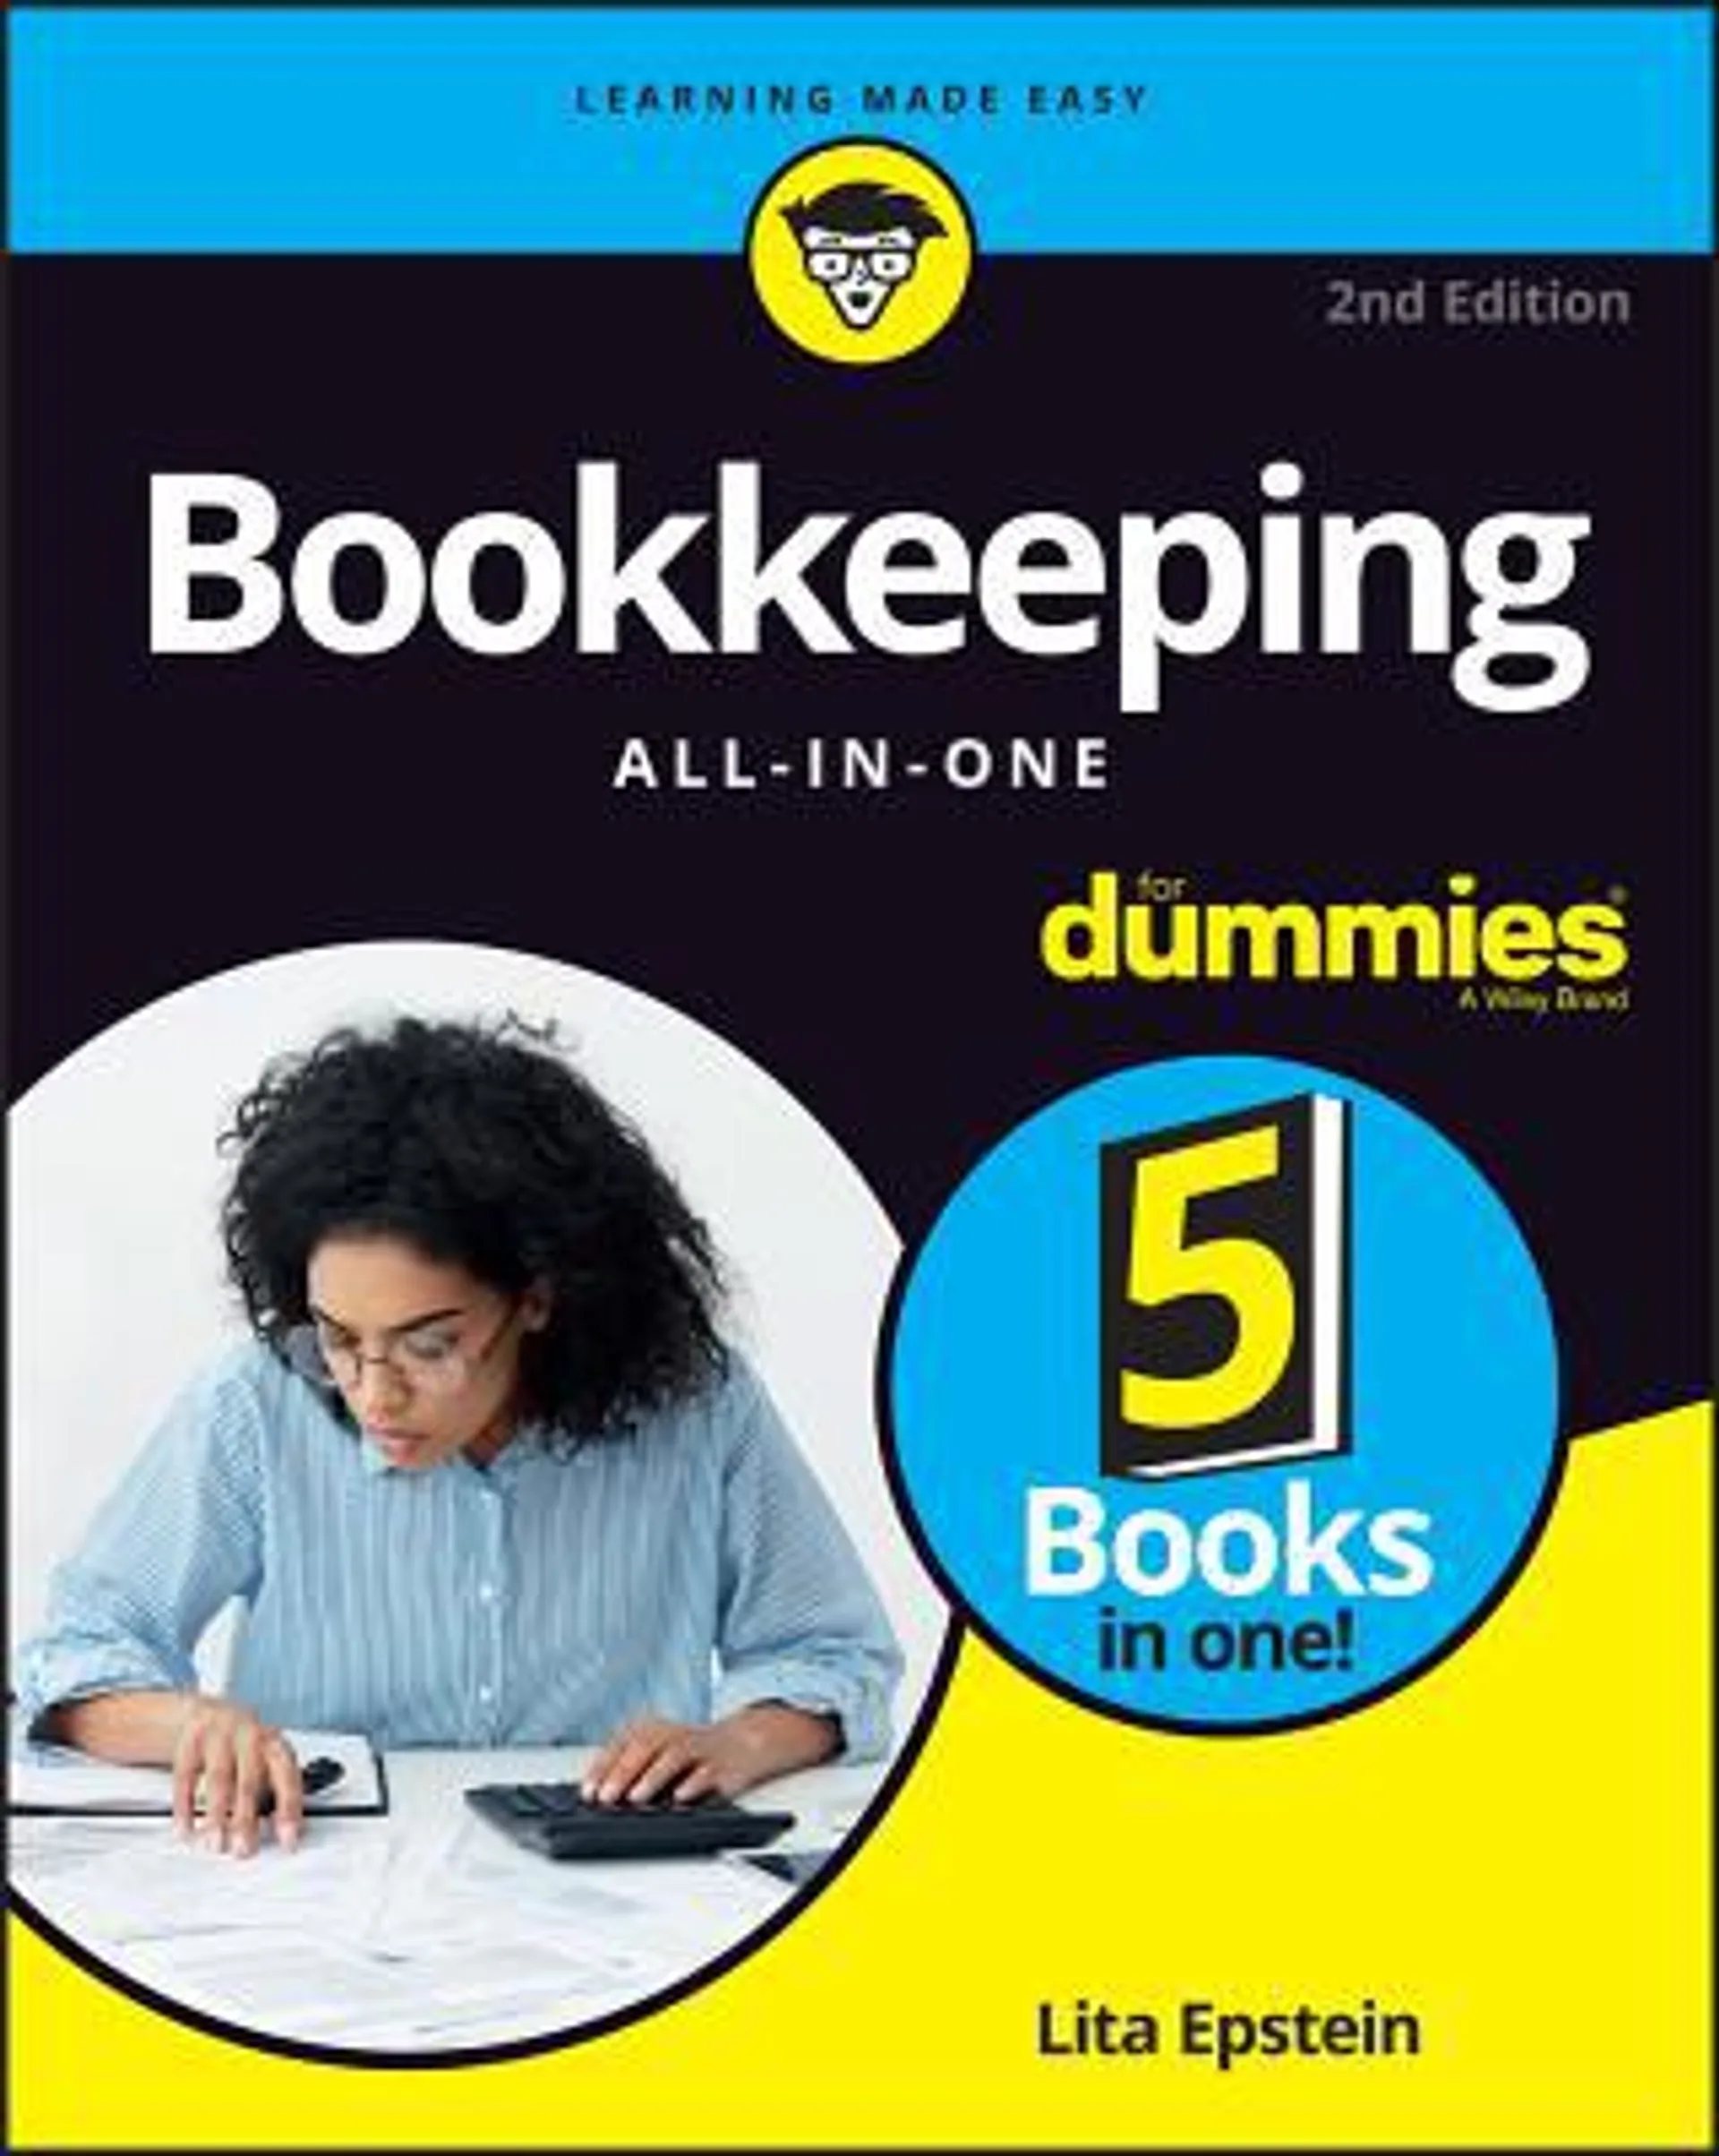 Bookkeeping All-in-One For Dummies, 2nd Edition (2nd edition)